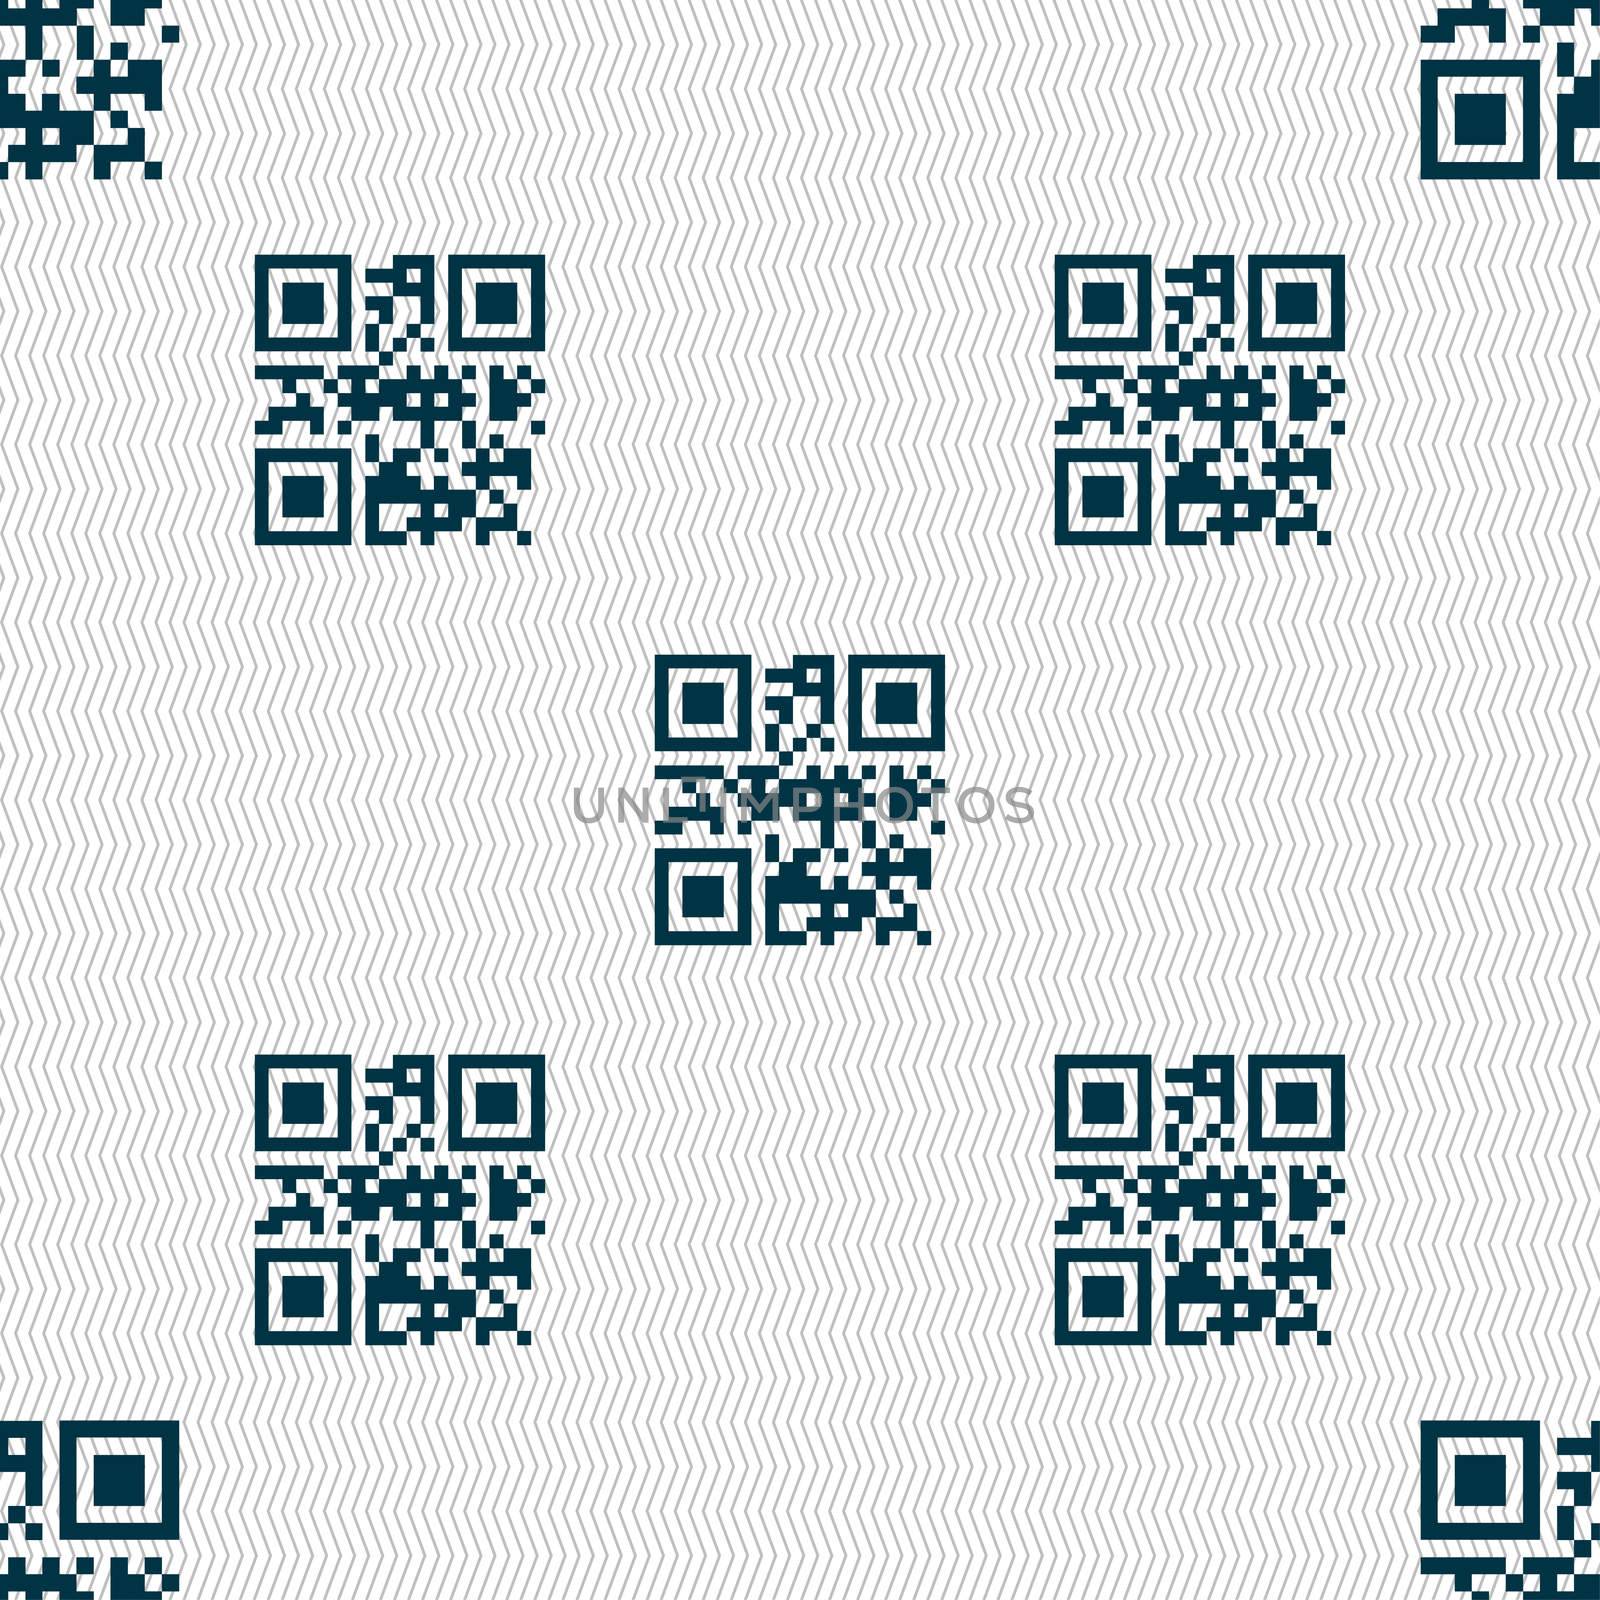 Qr code icon sign. Seamless pattern with geometric texture. illustration